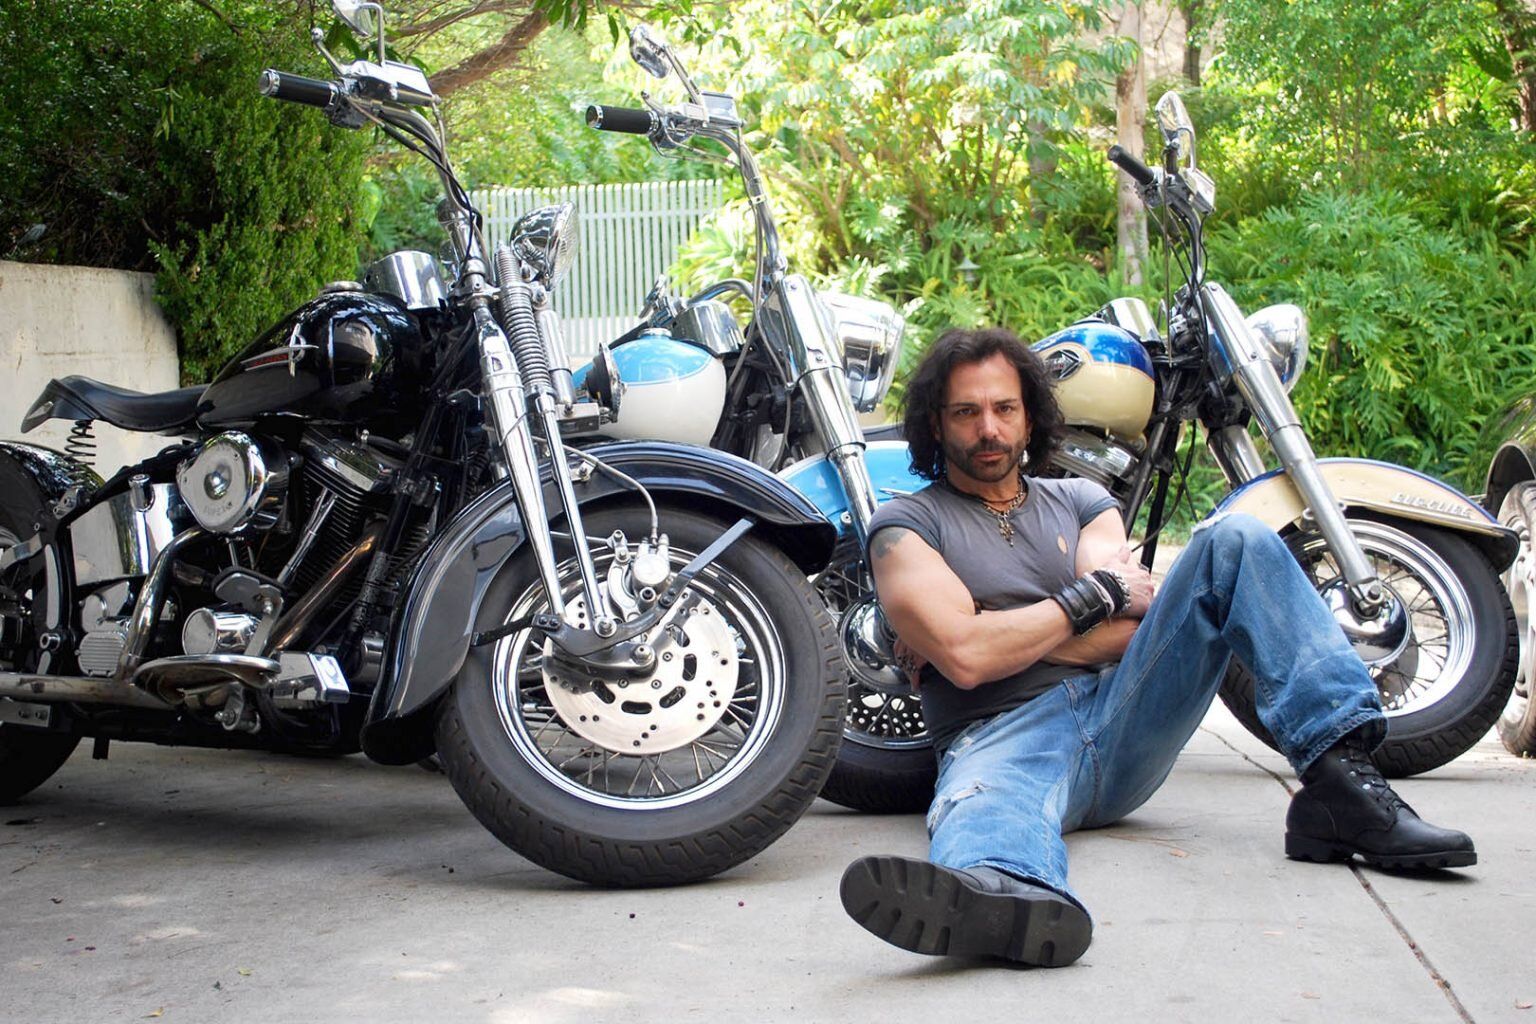 Richard Grieco with his motorcycle collection